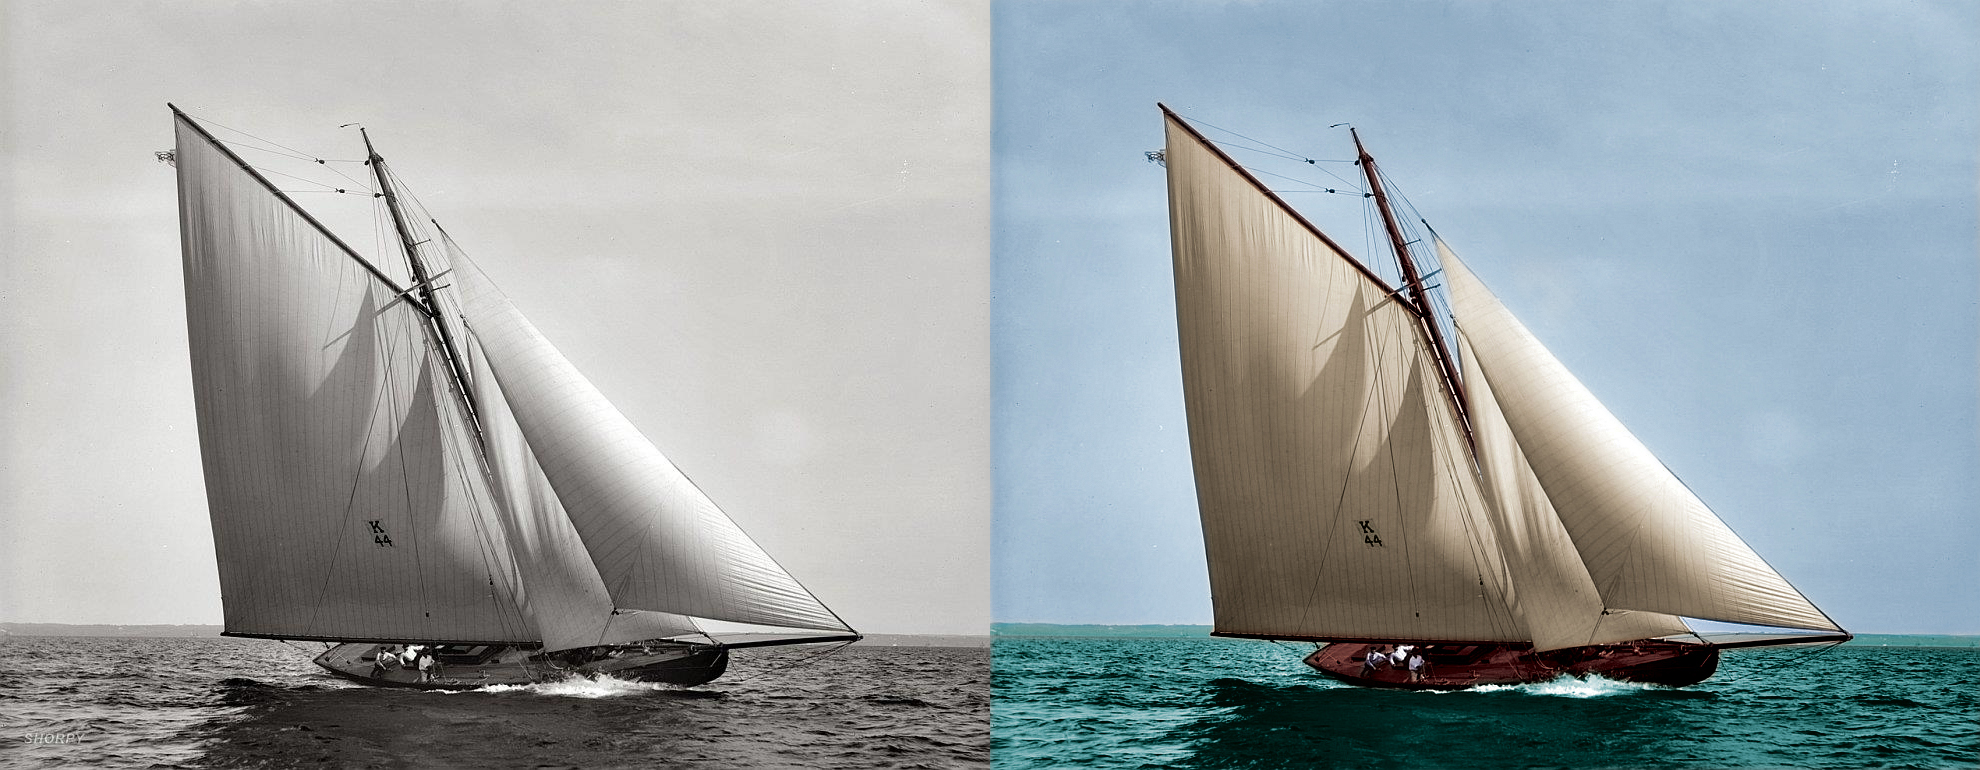 Black and White photo of this gaff-rigged schooner I colorized. I found a new hobby.